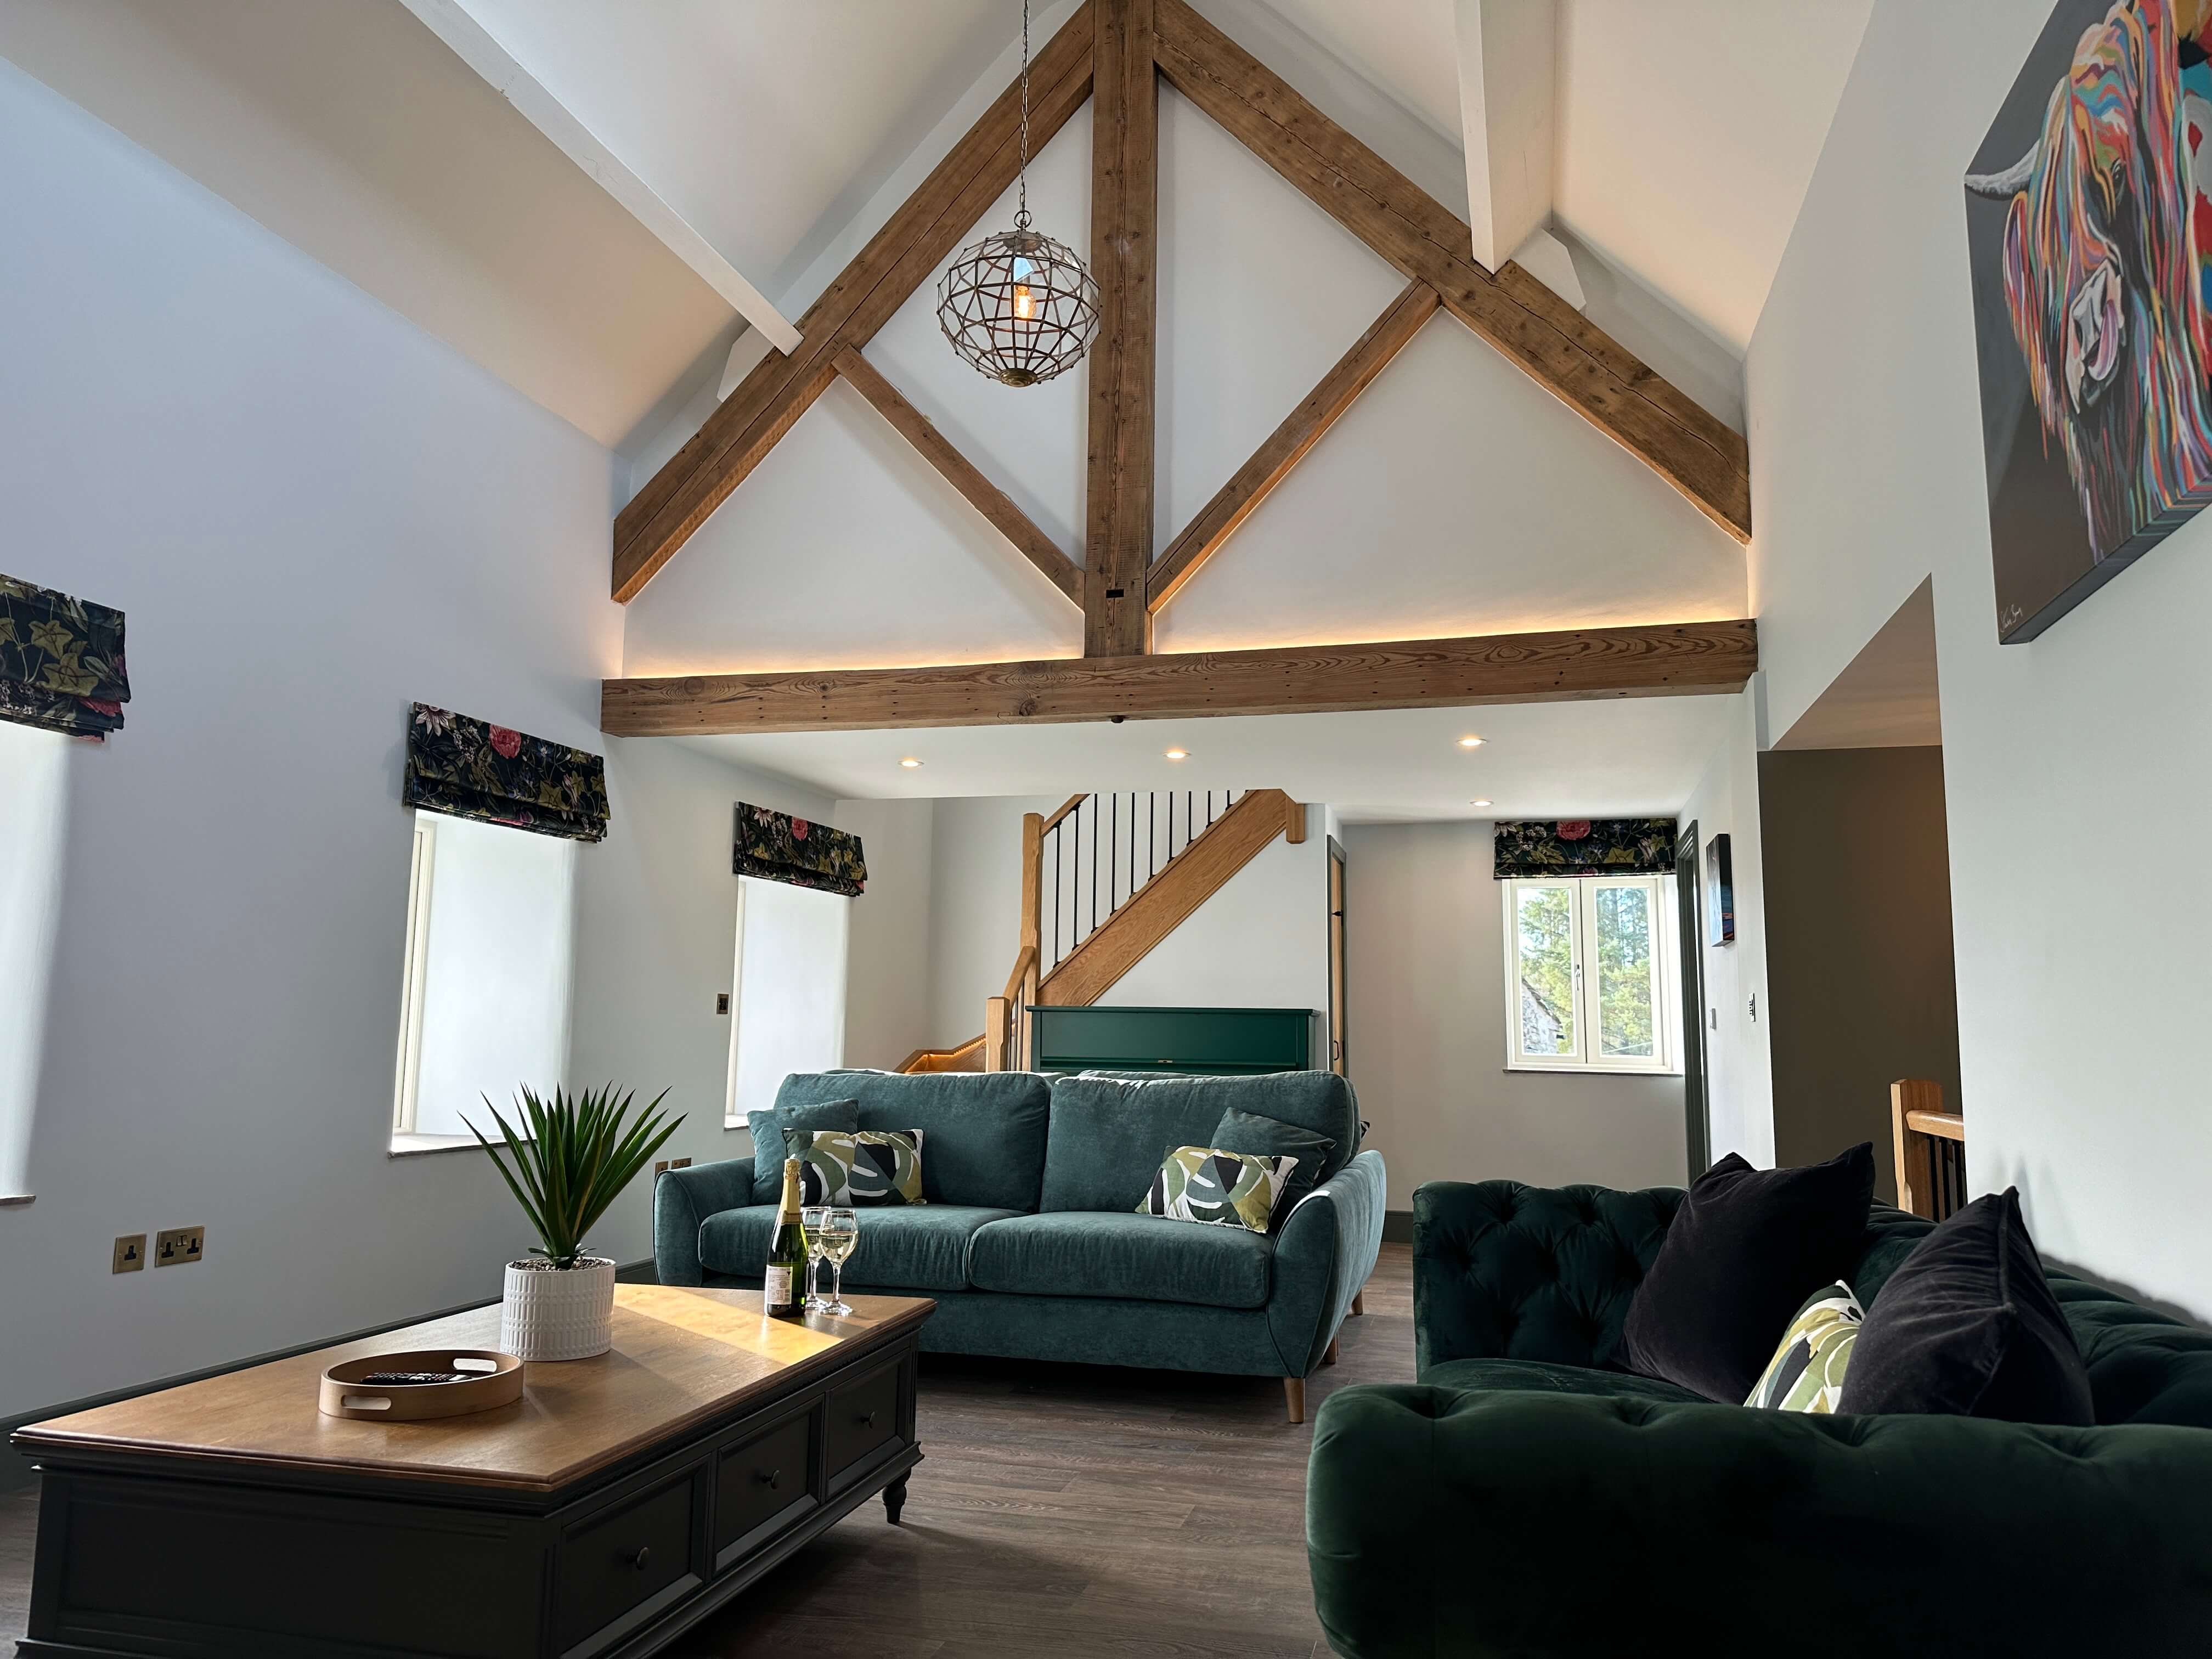 Moss Foot - gorgeous vaulted ceilings and beams in the lounge